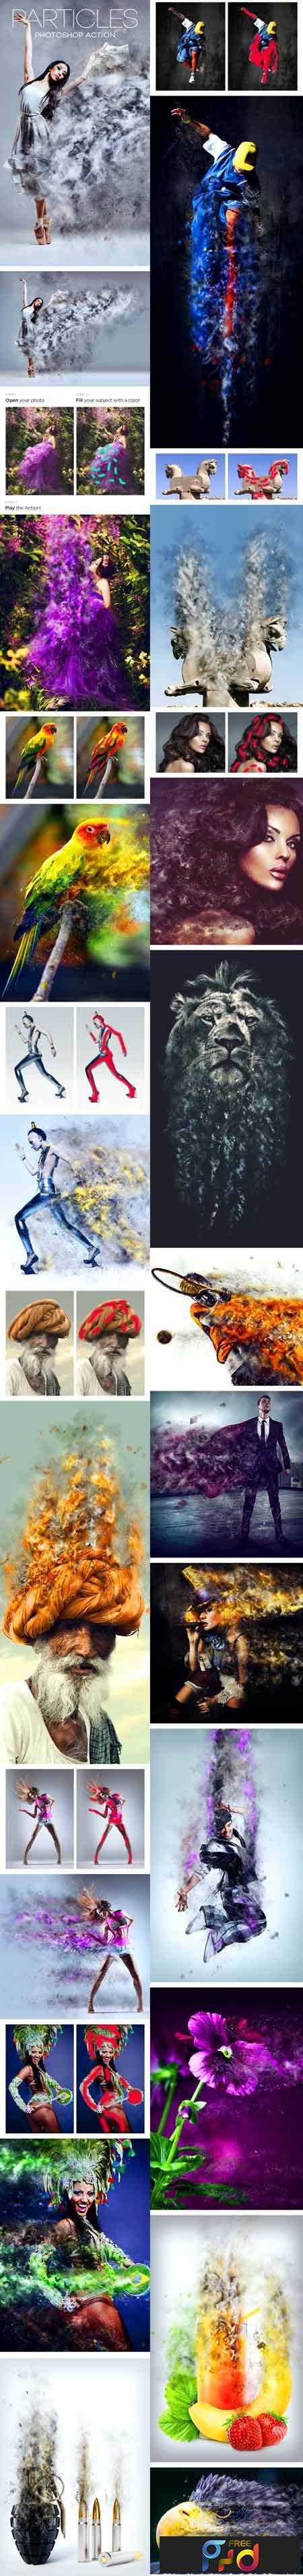 adobe photoshop actions download free particle